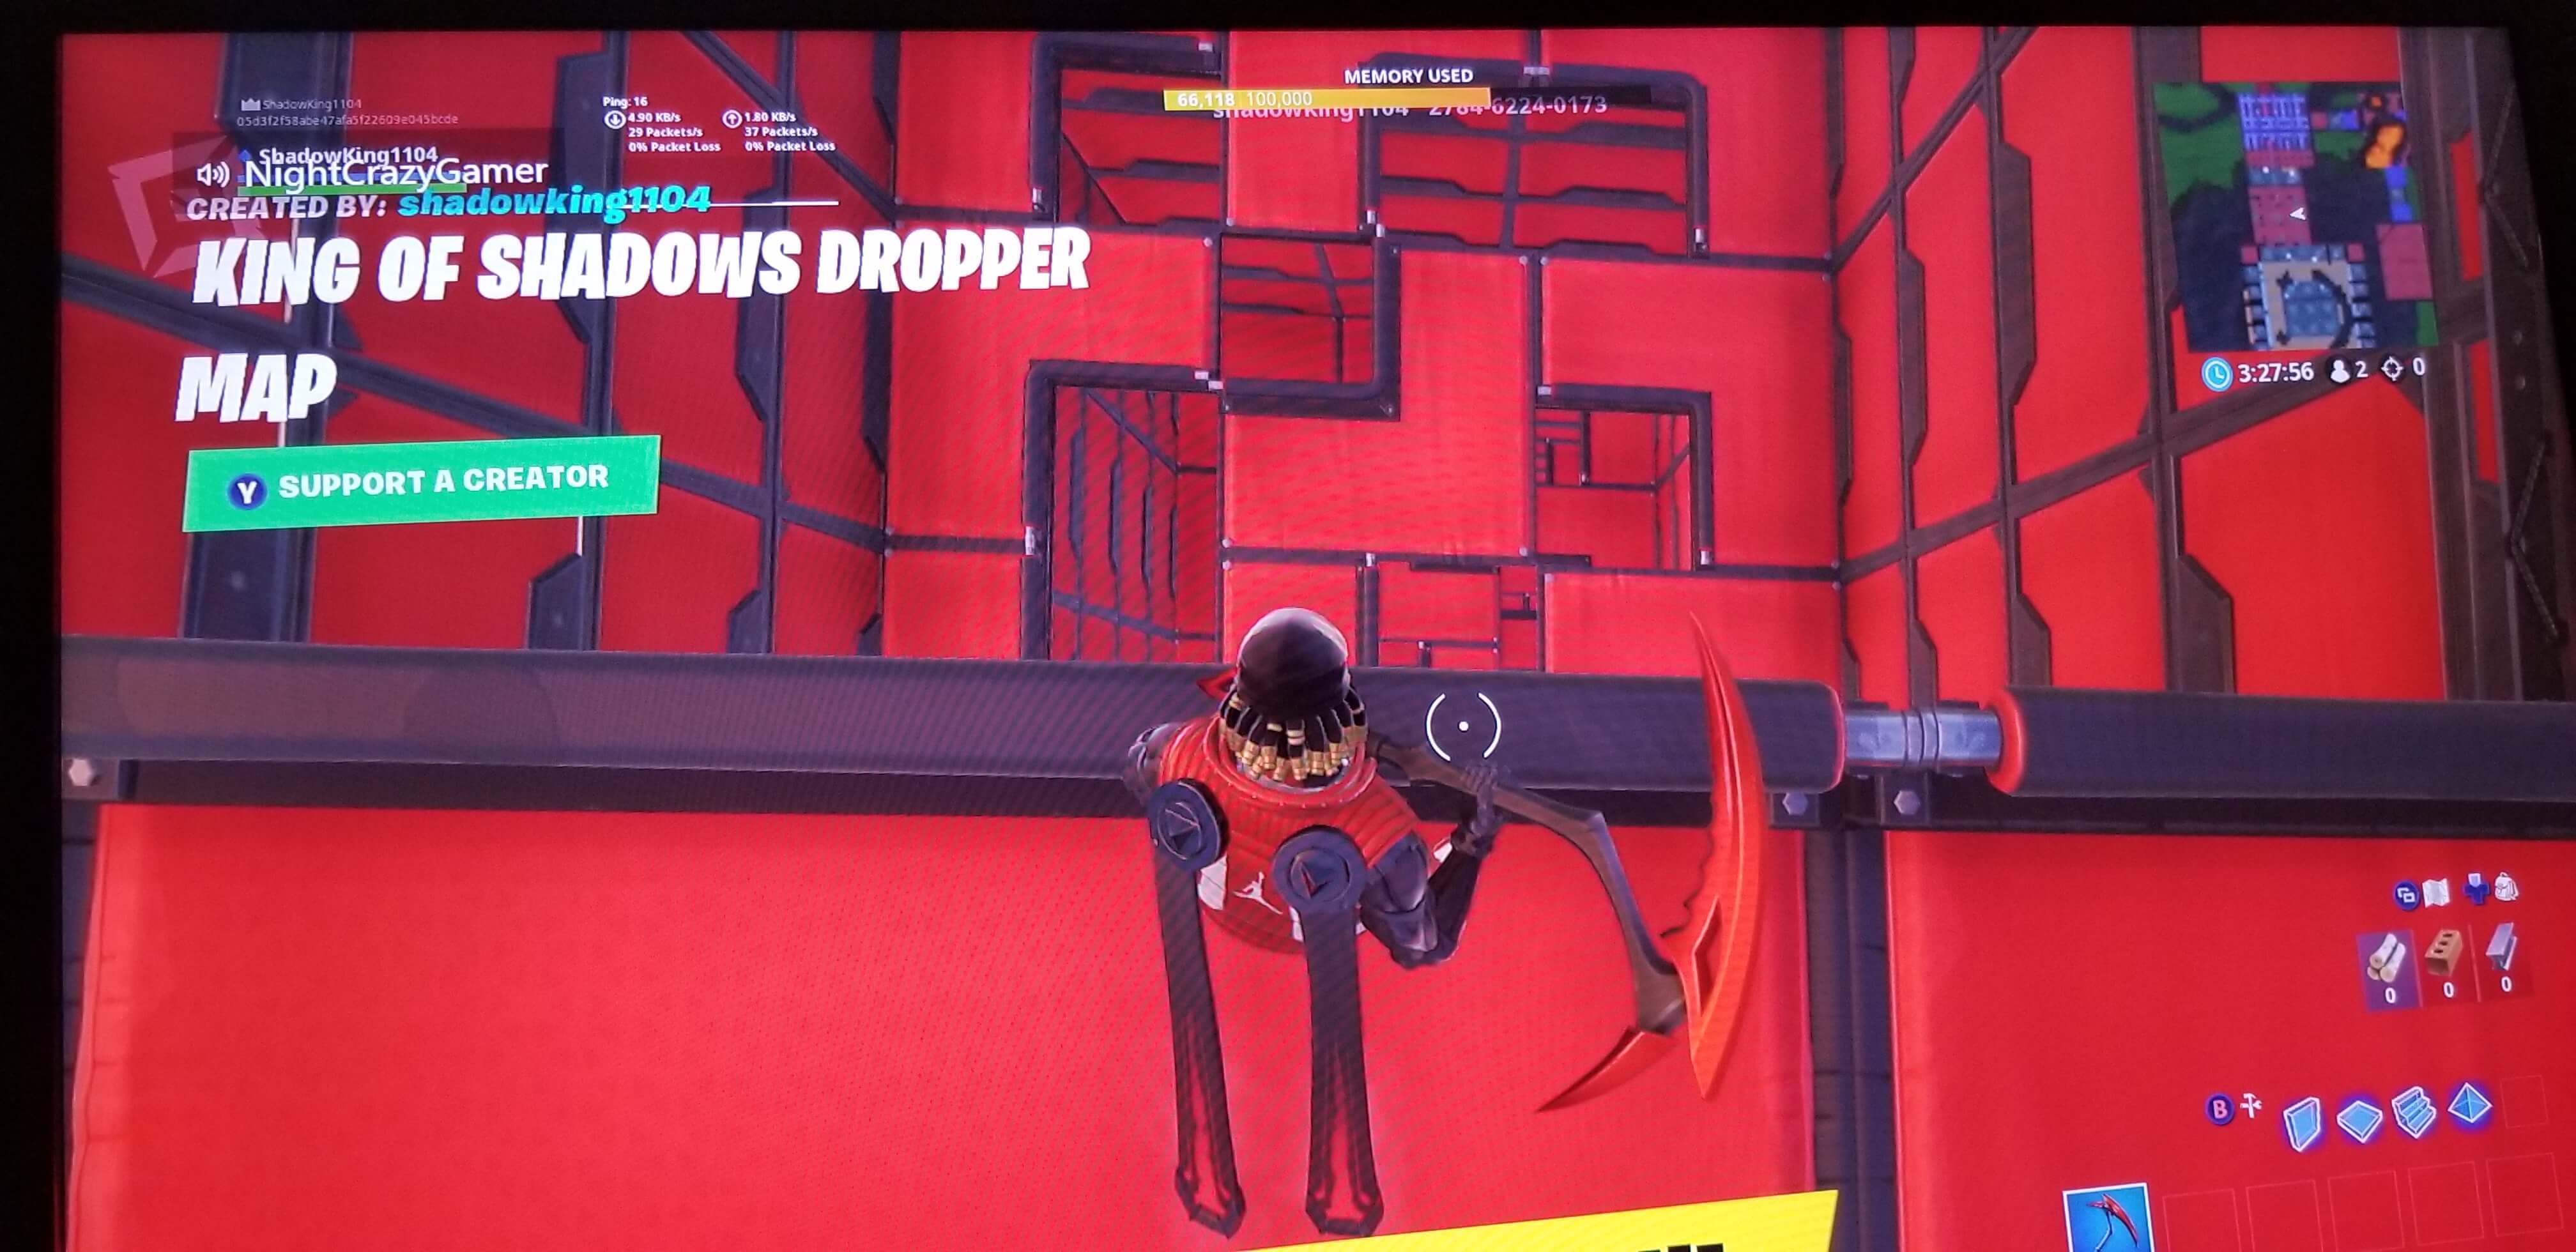 KING OF SHADOWS DROPPER MAP image 3